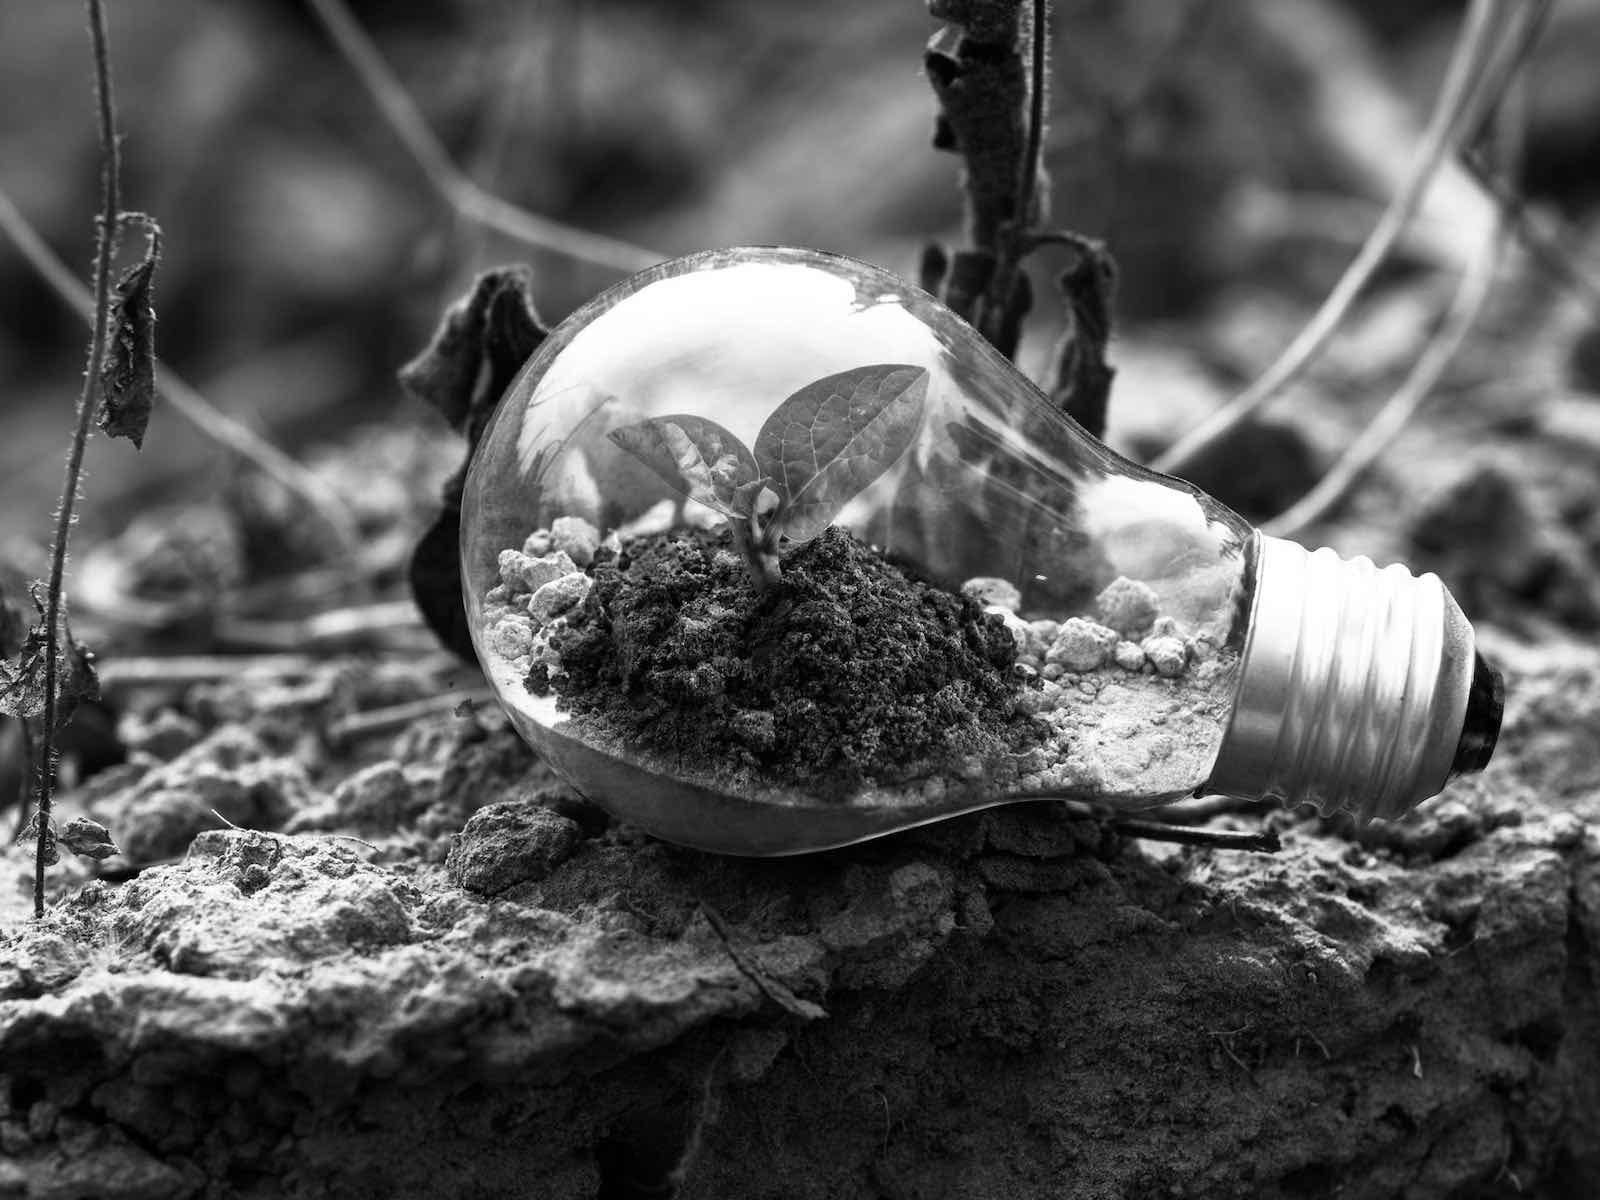 Abstract image of a bulb with a some earth and a little plant growing